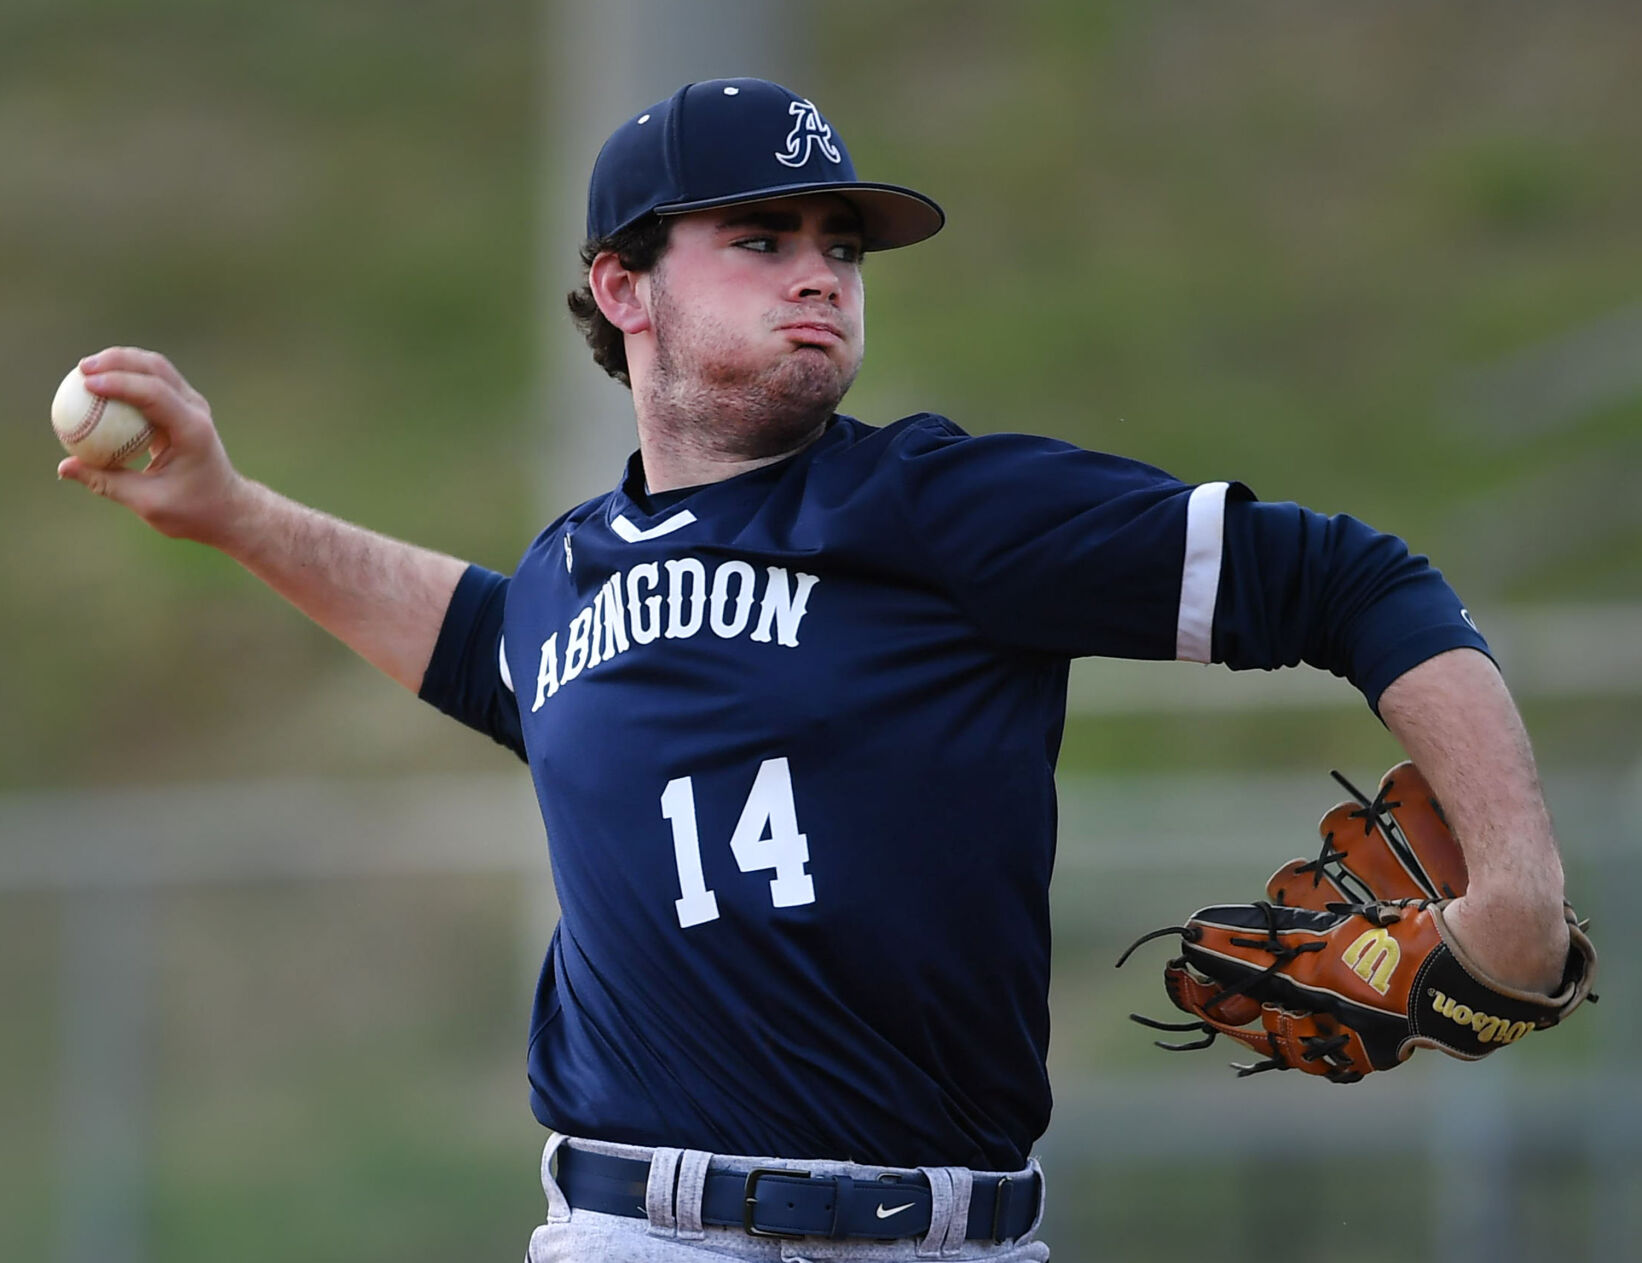 Abingdon High School Pitcher Jett Humphreys Commits to College of William & Mary